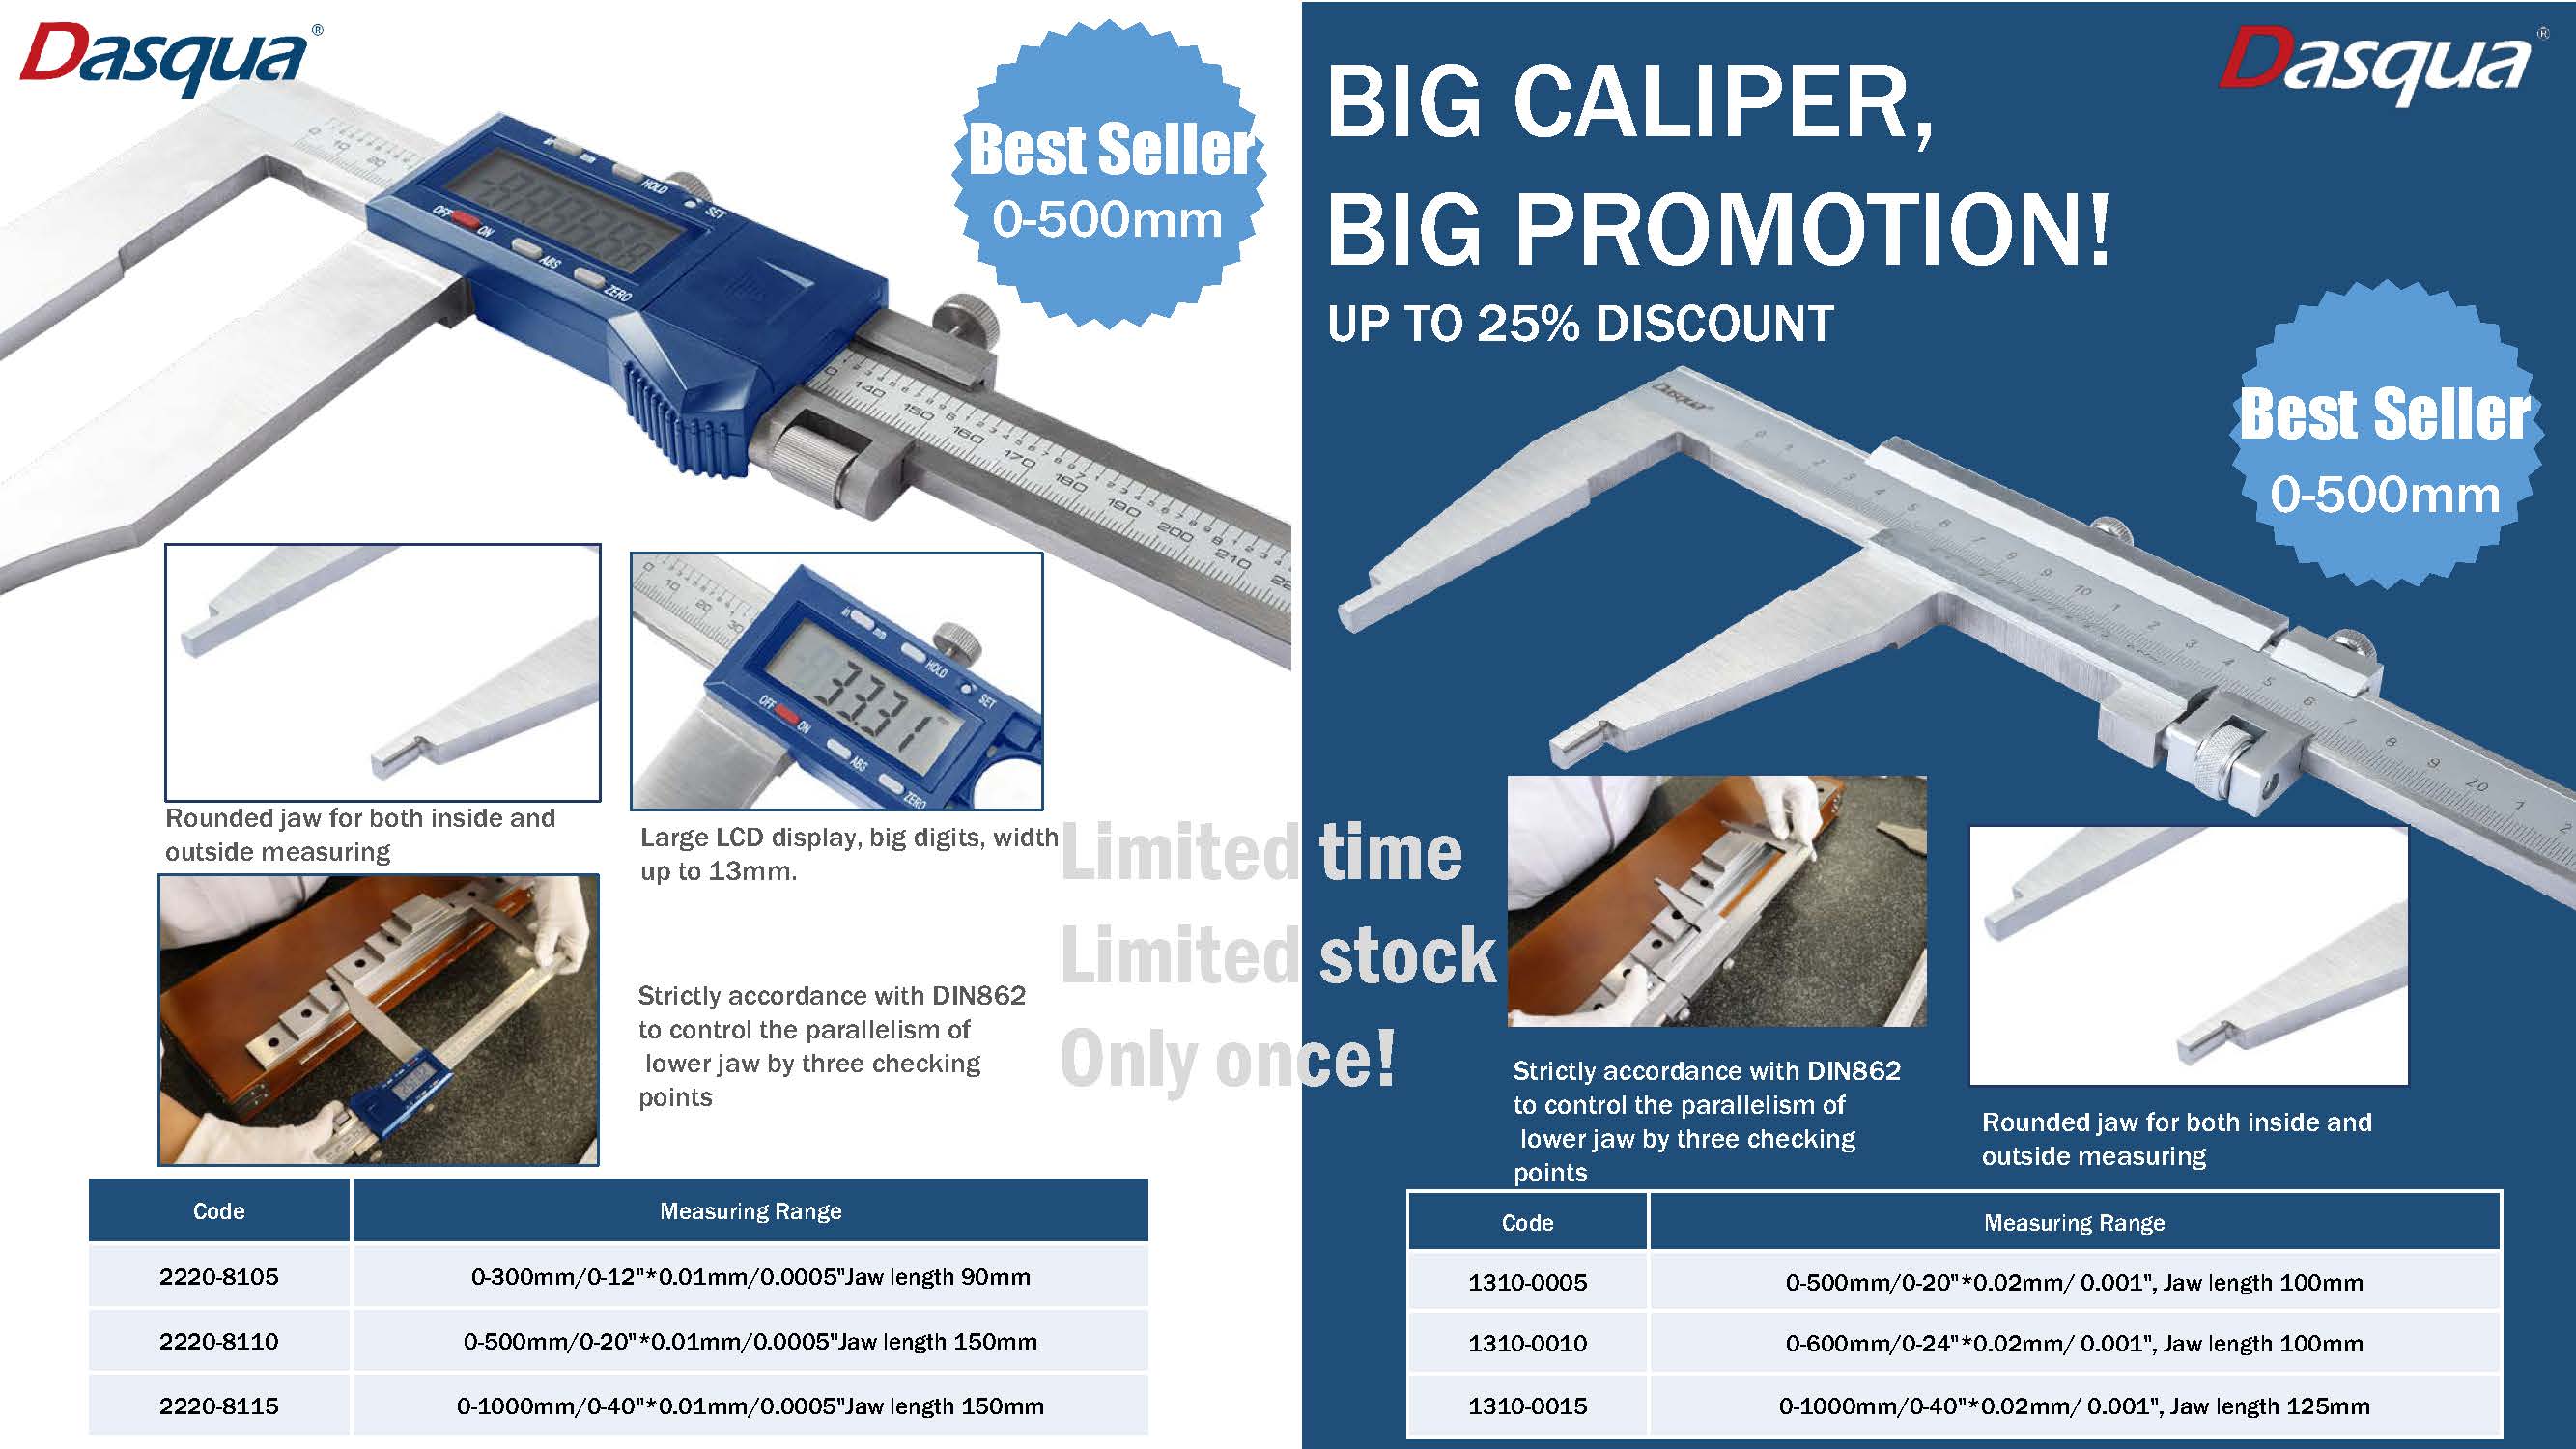 PROMOTION! The Most Cost-Effective Heavy Duty Caliper from DASQUA®